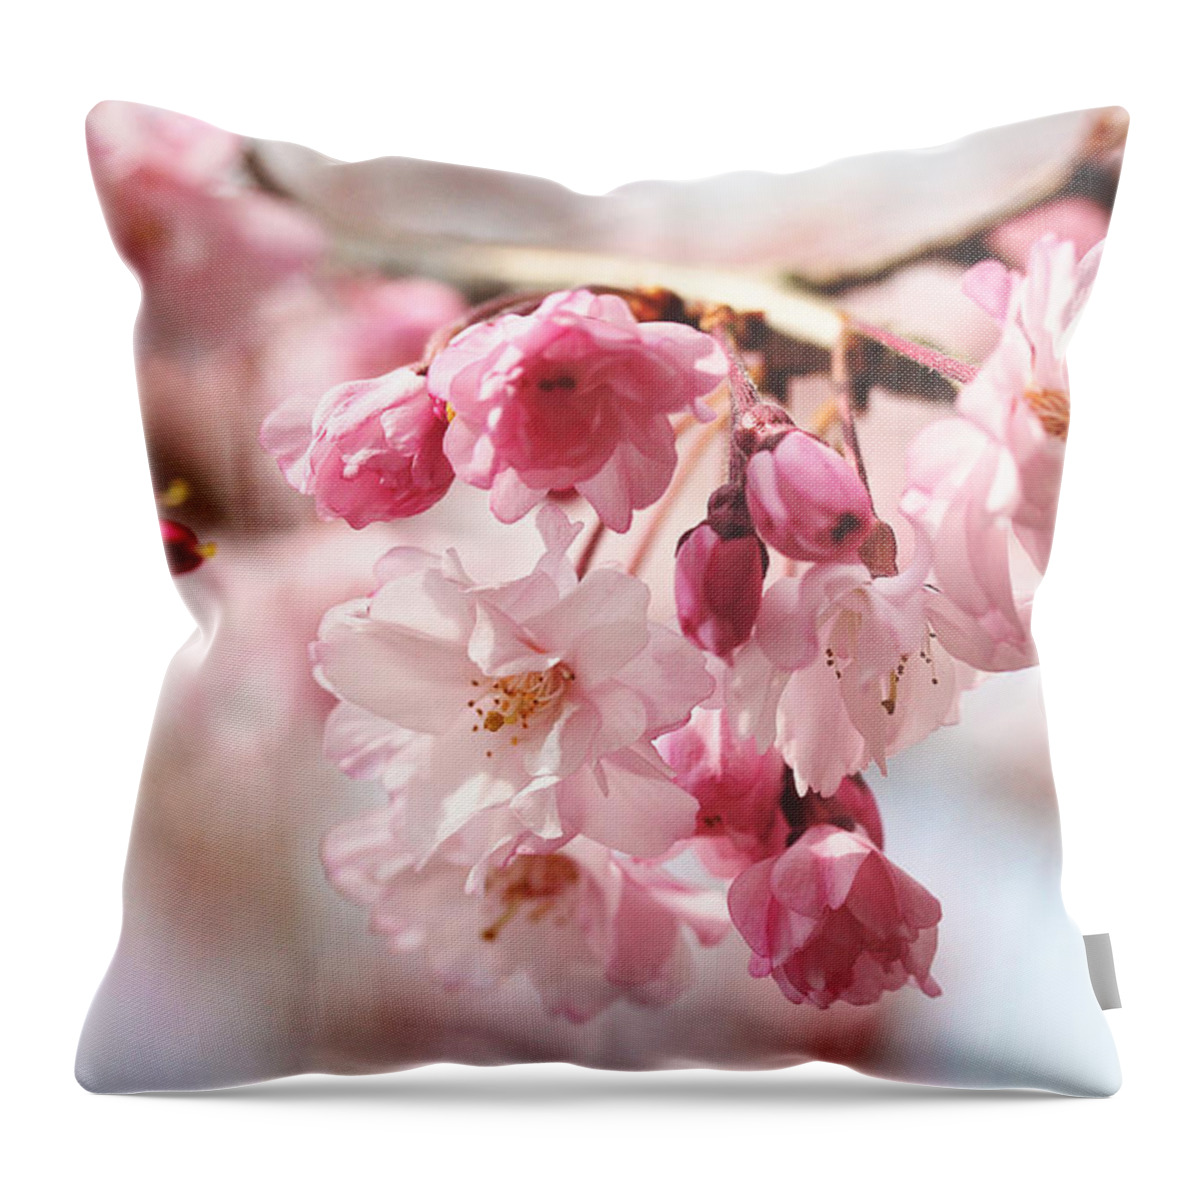 Floral Throw Pillow featuring the photograph Pink Cherry Blossoms by Trina Ansel